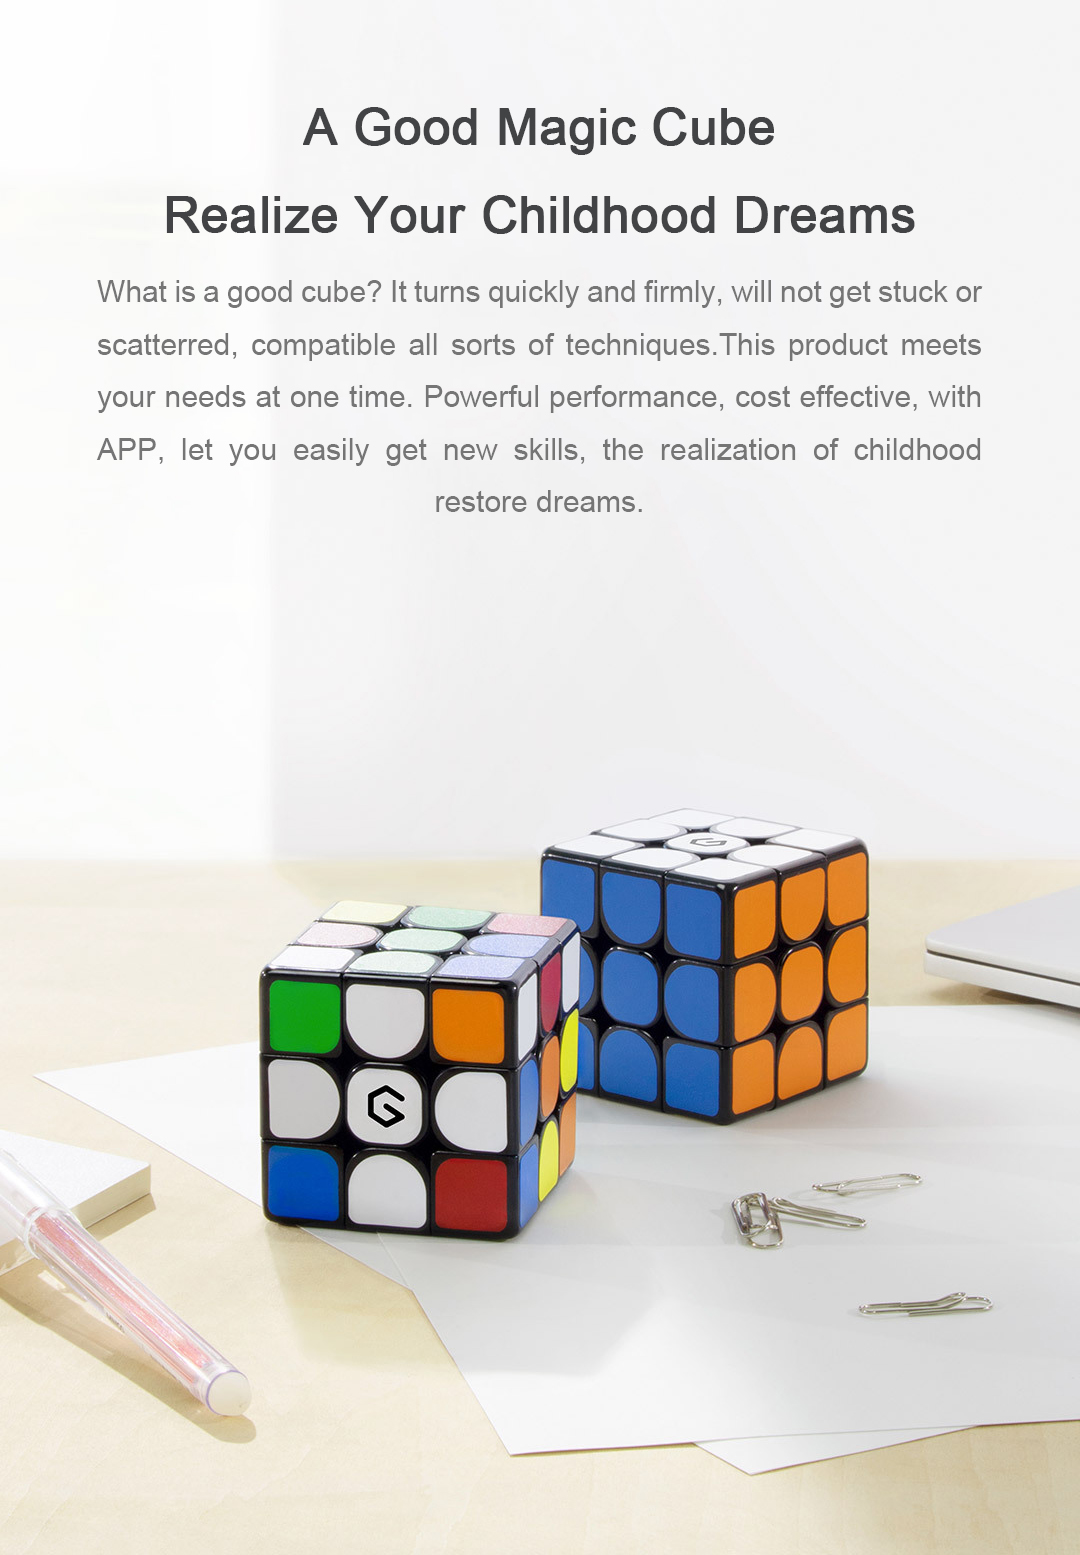 Xiaomi Giiker M3 Magnetic Cube 3x3x3 Vivid Color Square Magic Cube Puzzle Science Education Toy Gift 19